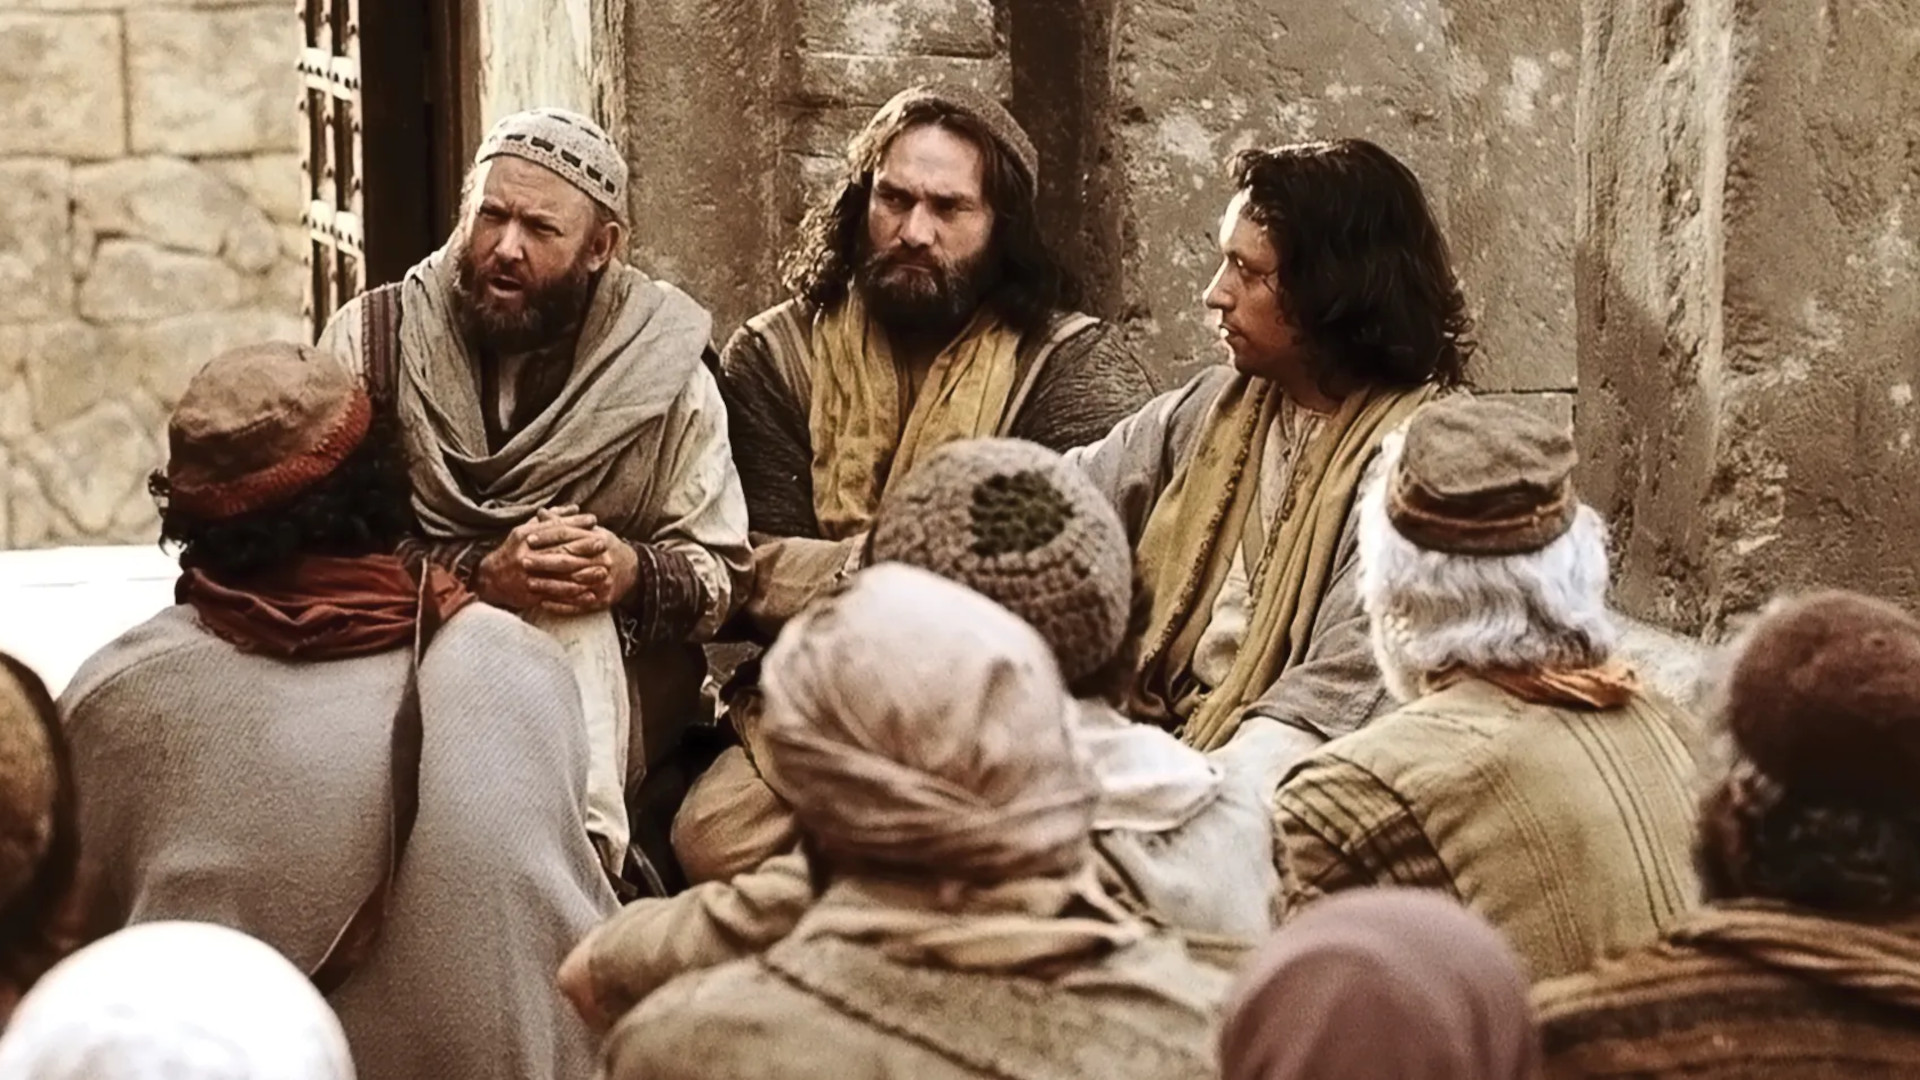 Paul preaches to a crowd with Peter and John. Image from the Bible Videos of The Church of Jesus Christ of Latter-day Saints